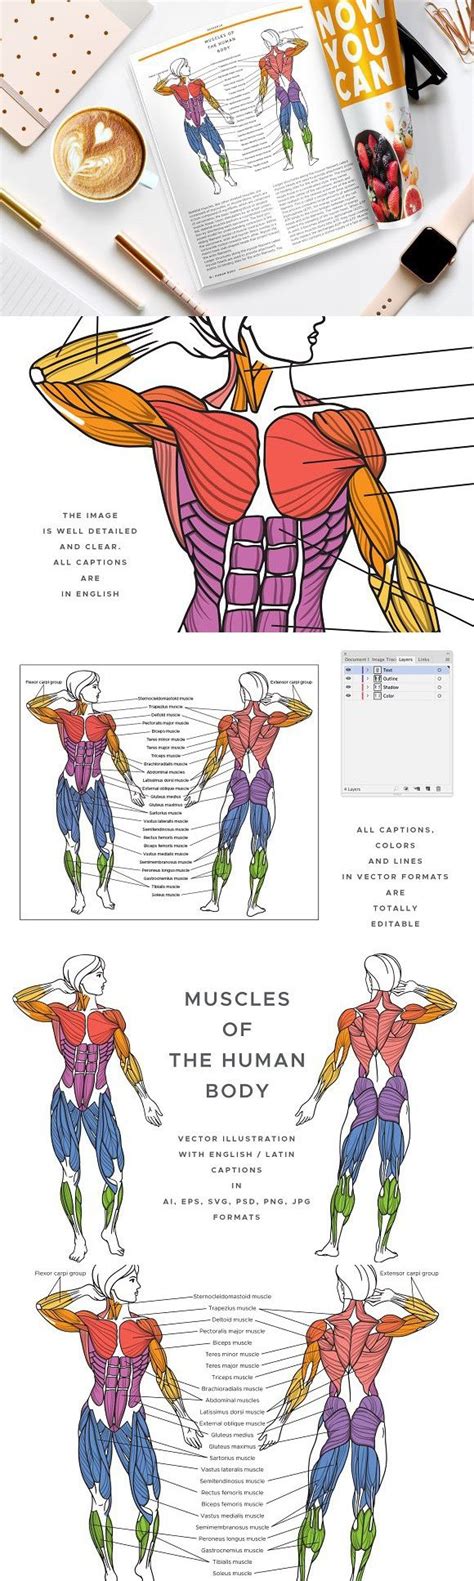 Muscle makes up around half of the total human body weight. Muscles Of The Human Body | Human muscular system, Human ...